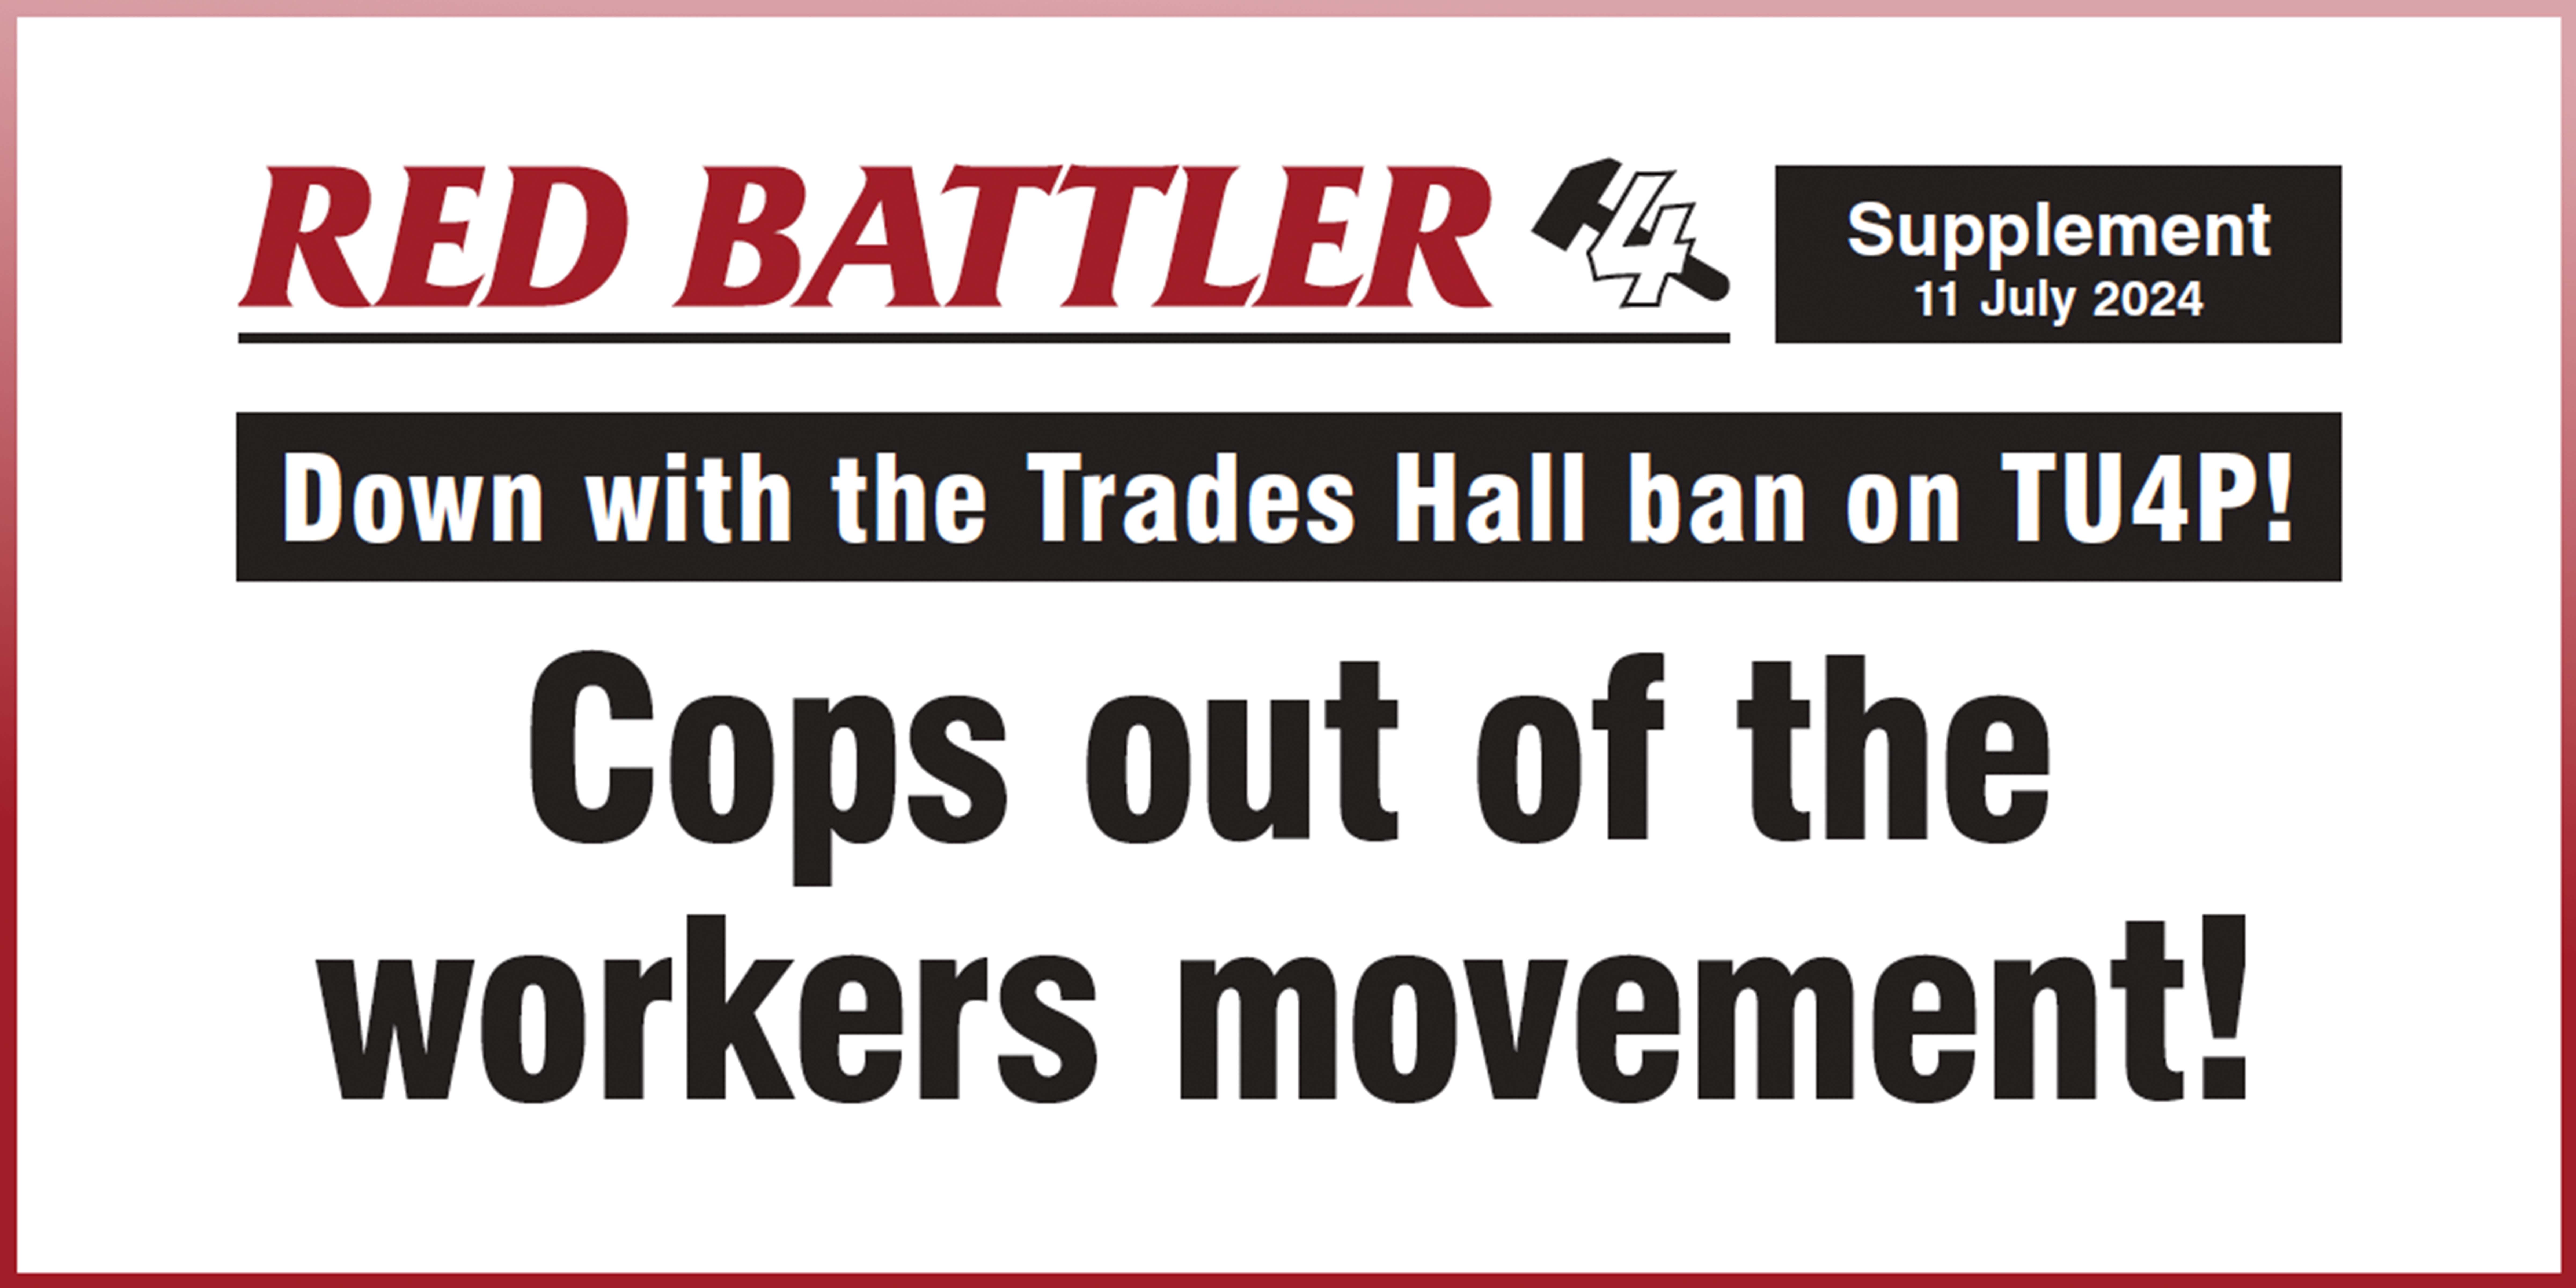 Cops out of the workers movement!